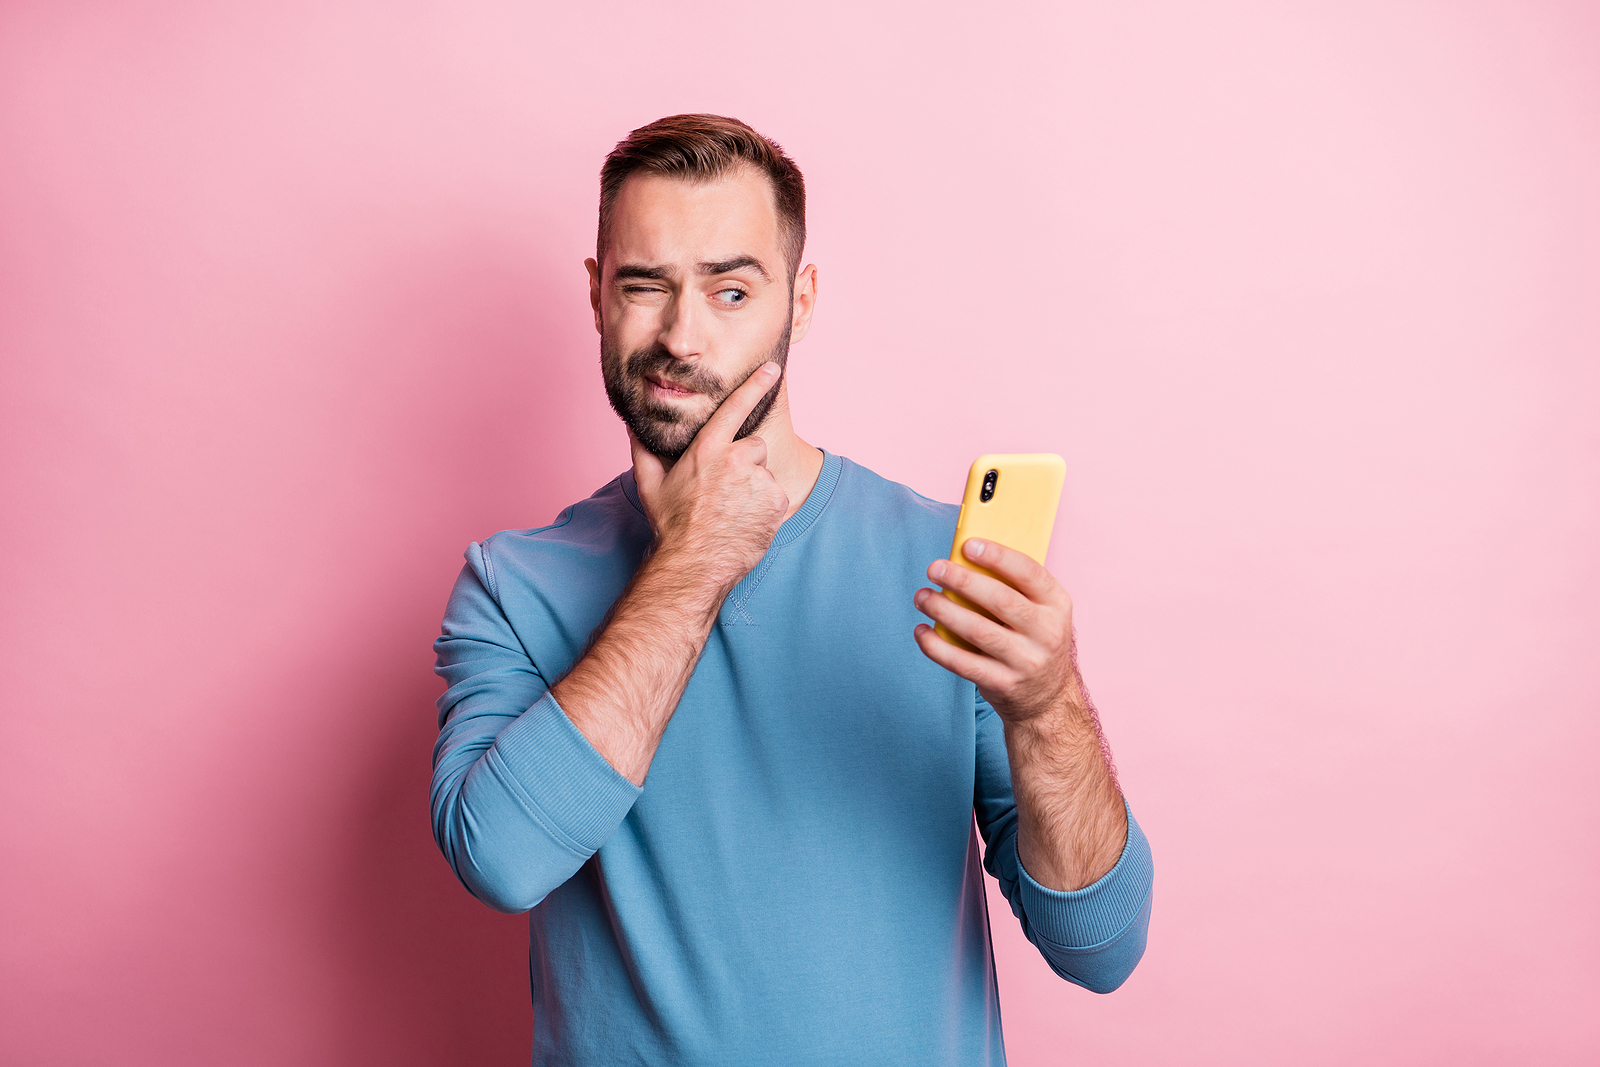 A man looks at his phone with one eye while contemplating, holding a hand to his chin against a pink background.